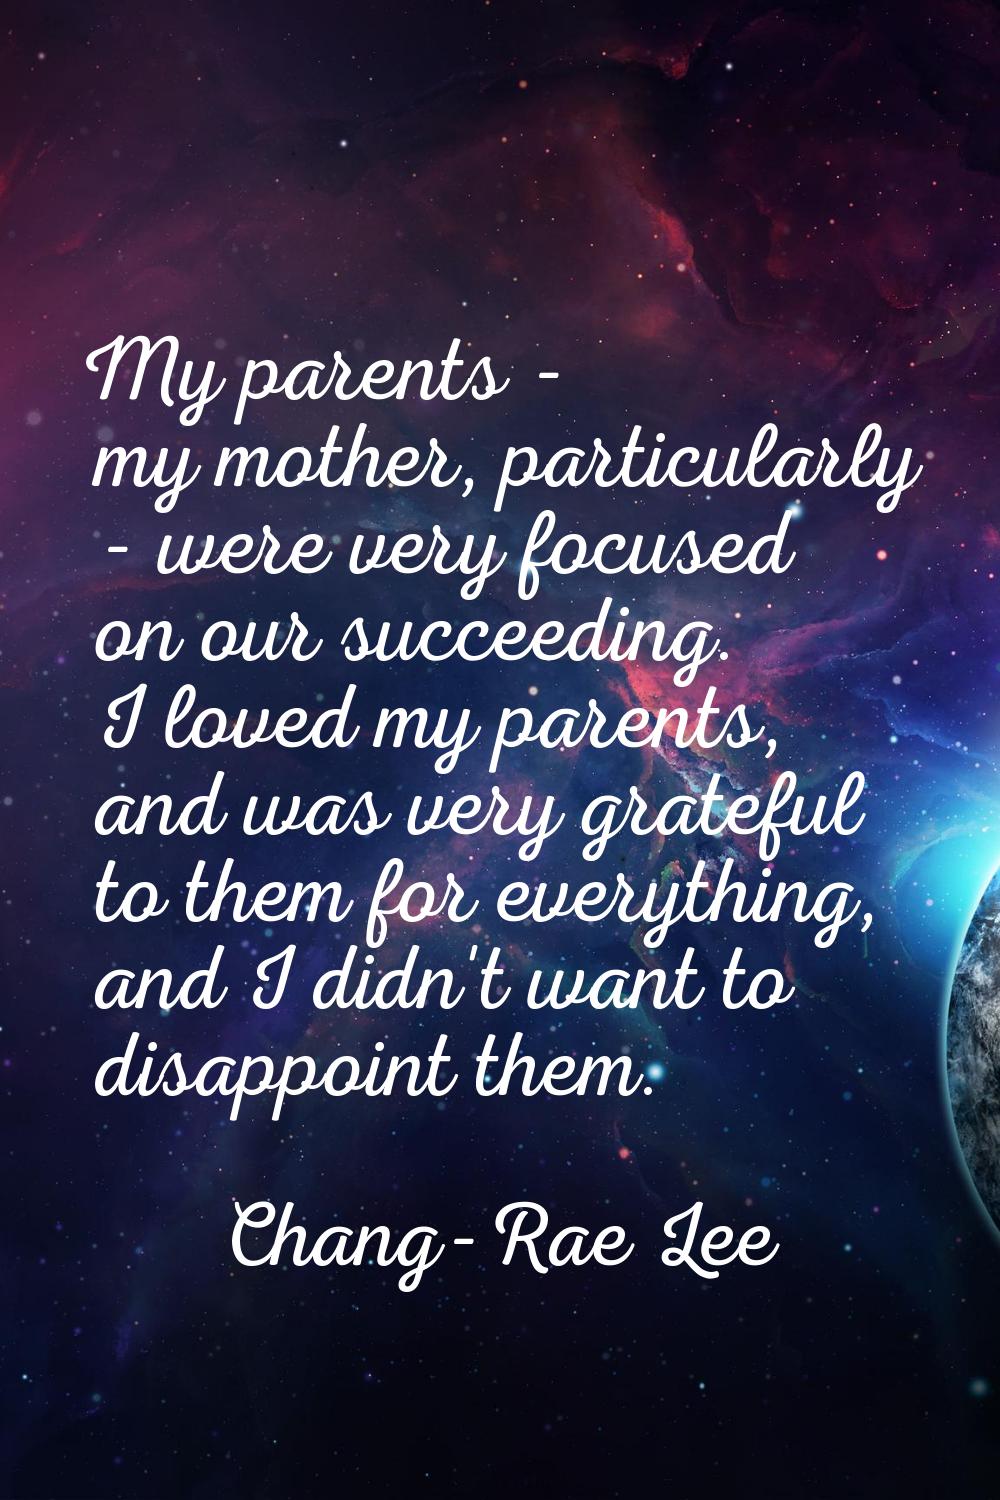 My parents - my mother, particularly - were very focused on our succeeding. I loved my parents, and